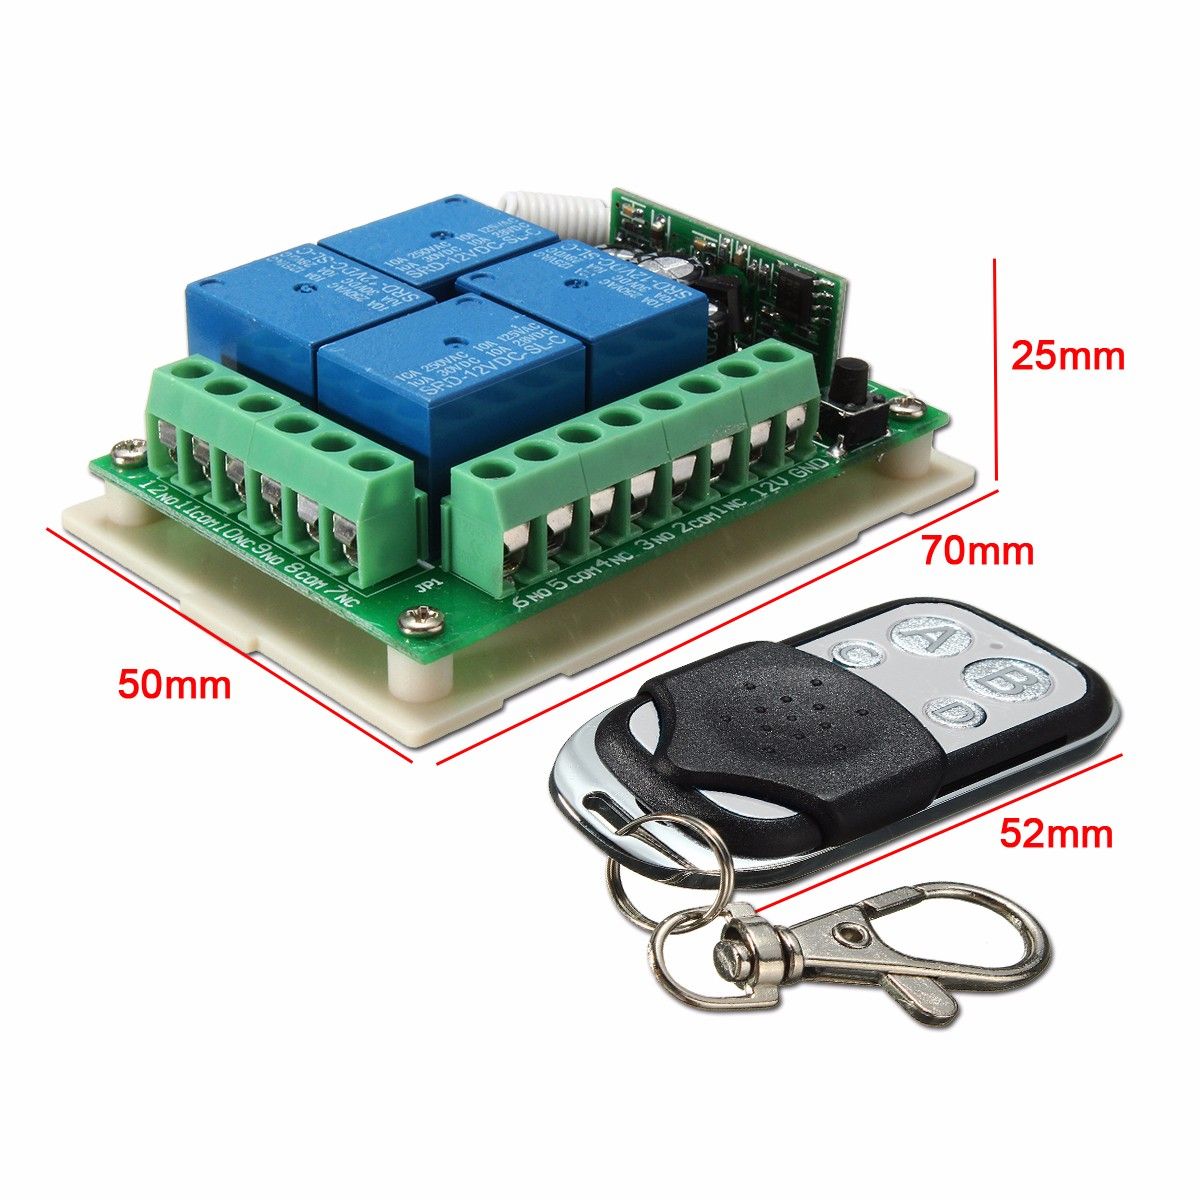 10A-Relay-12V-4CH-Channel-433MHZ-Wireless-Remote-Control-Switch-Receiver-Board-with-Remote-1633261